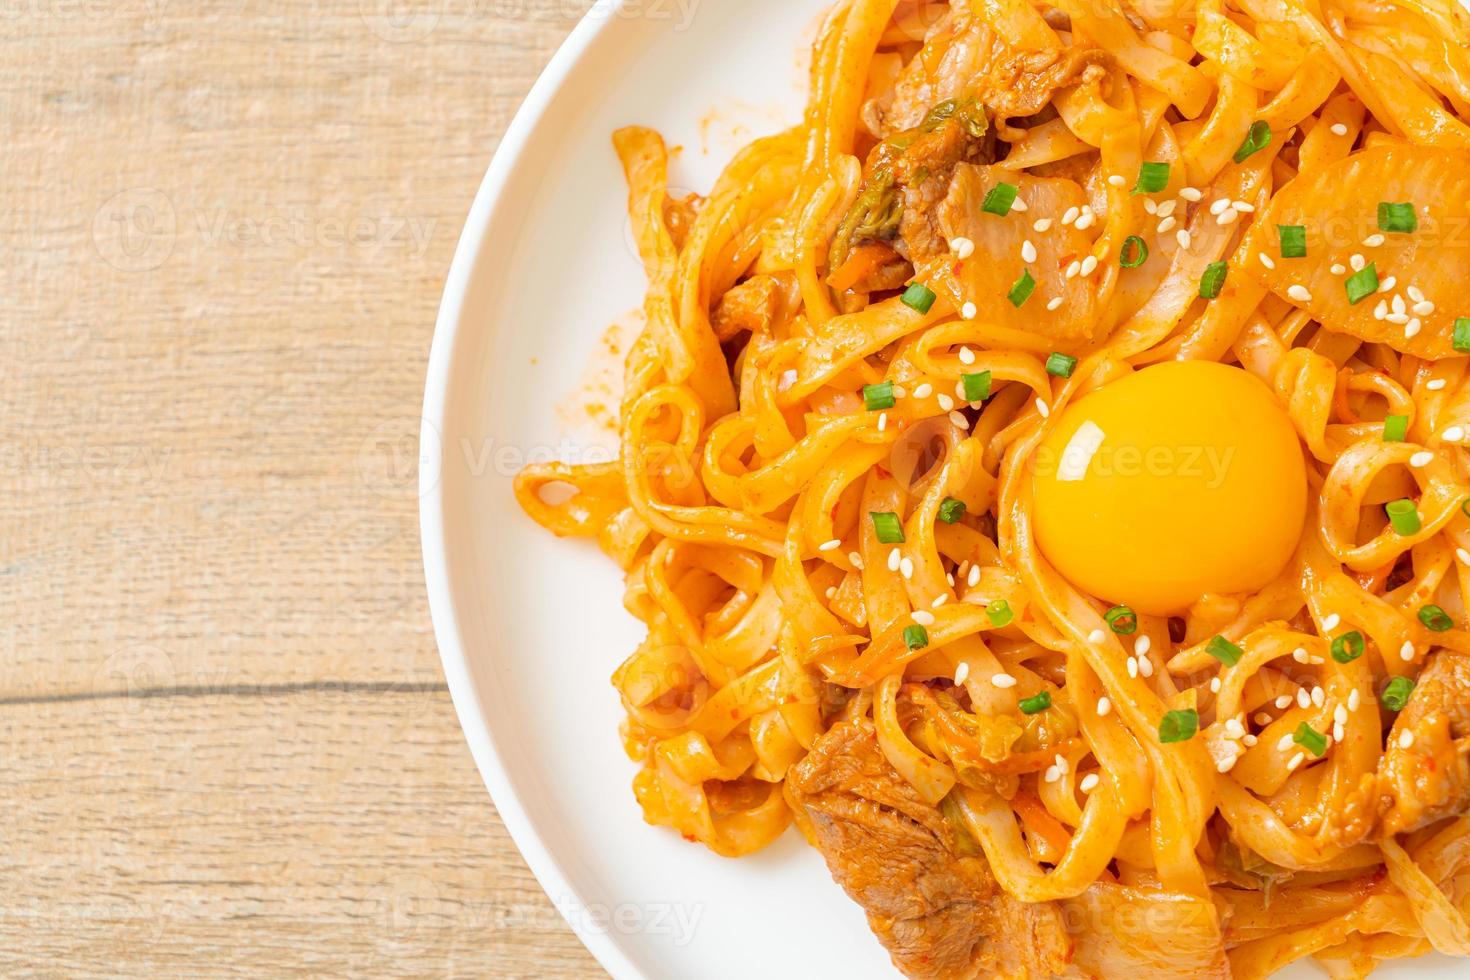 Stir-fried udon noodles with kimchi and pork - Korean food style photo